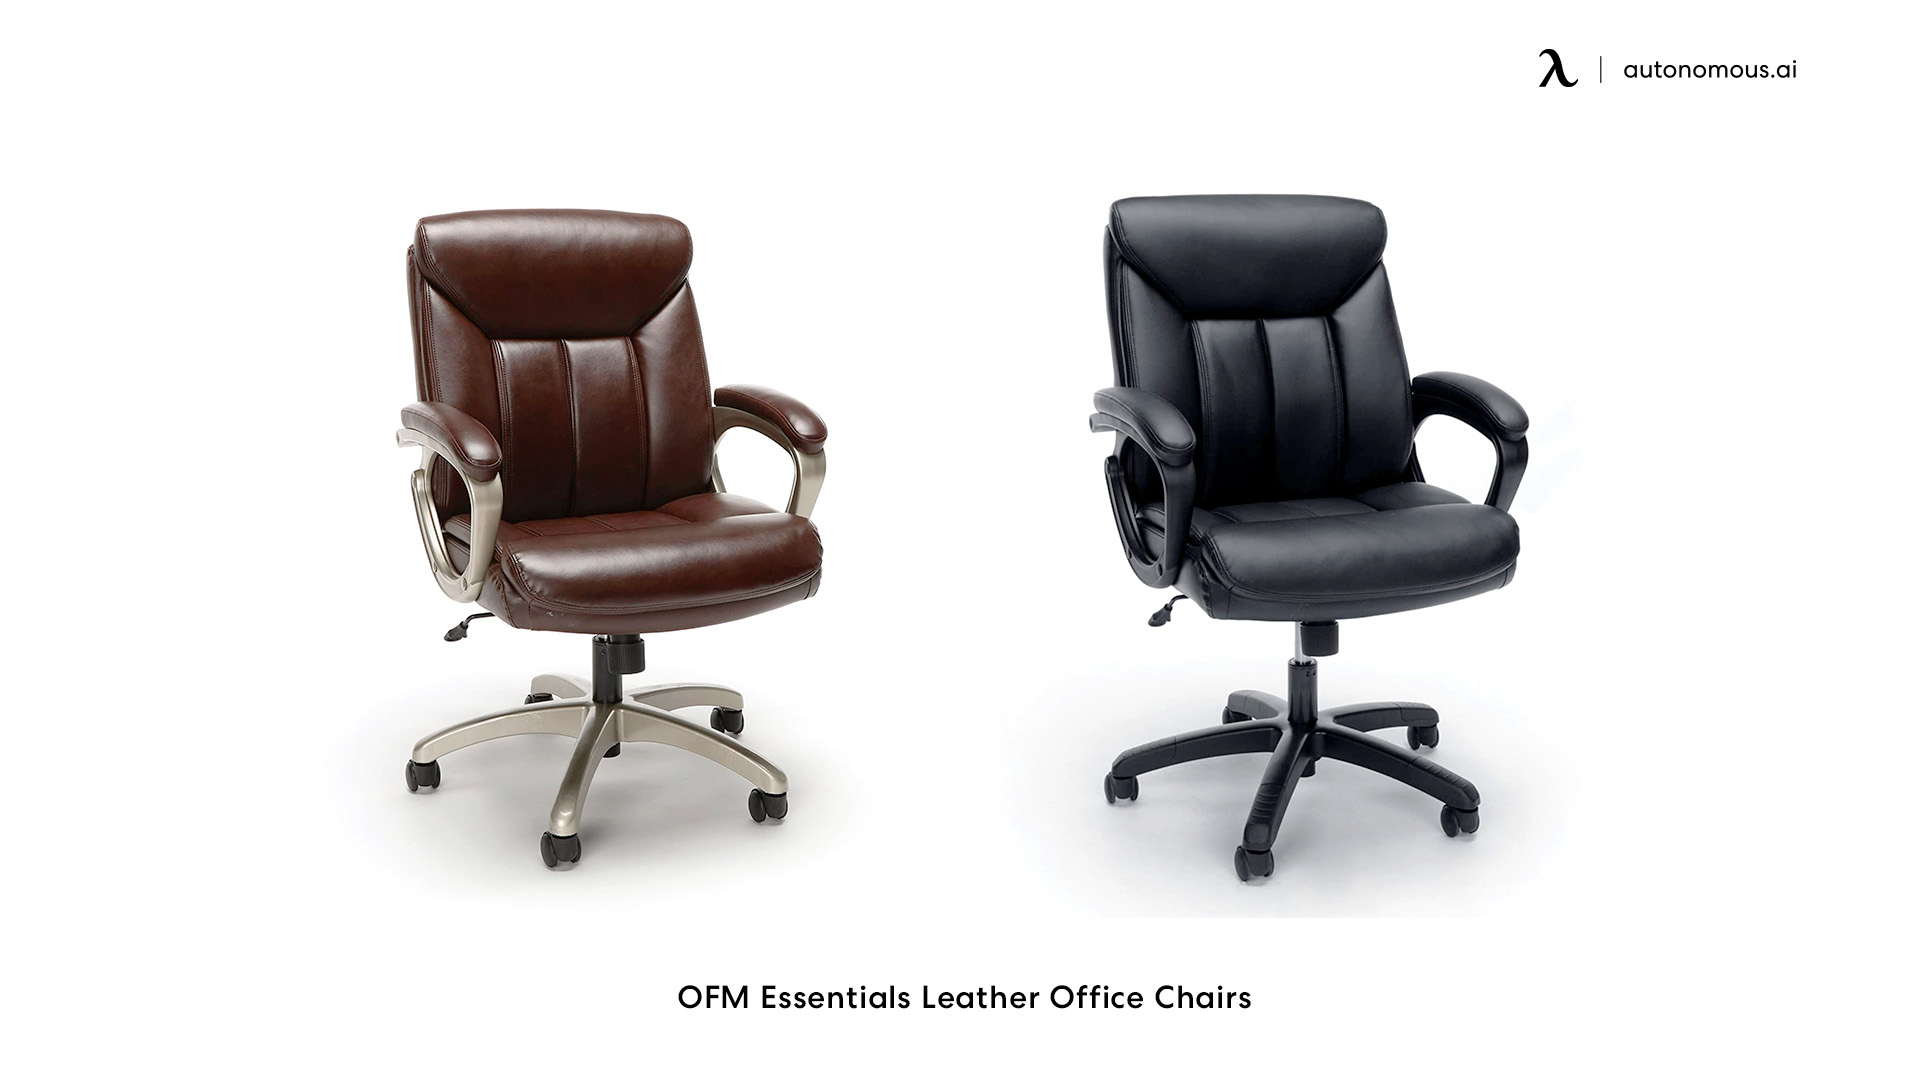 OFM Essentials Leather Office Chairs